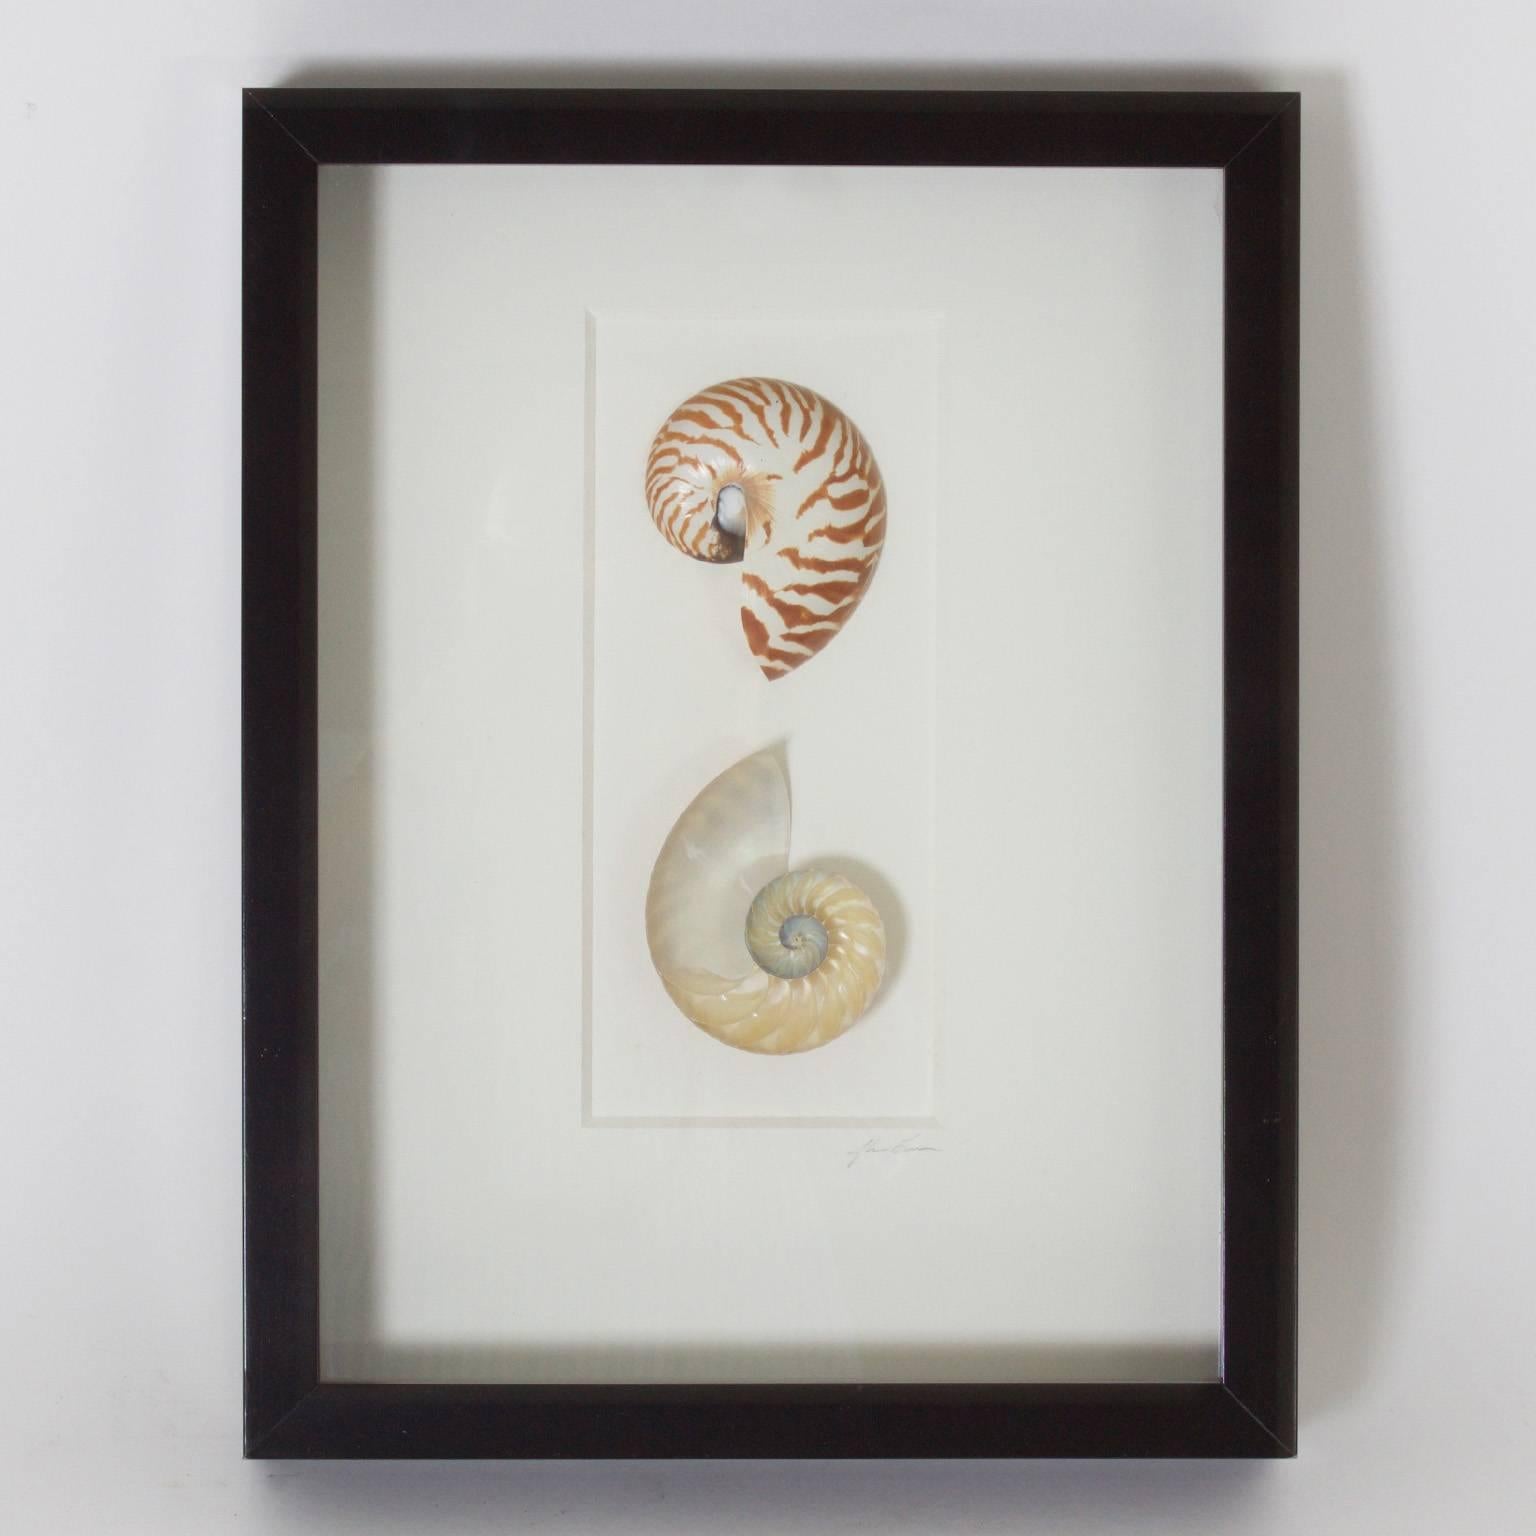 Inspired natural Nautilus seashell specimen, carefully curated and presented in a shadow box.

 